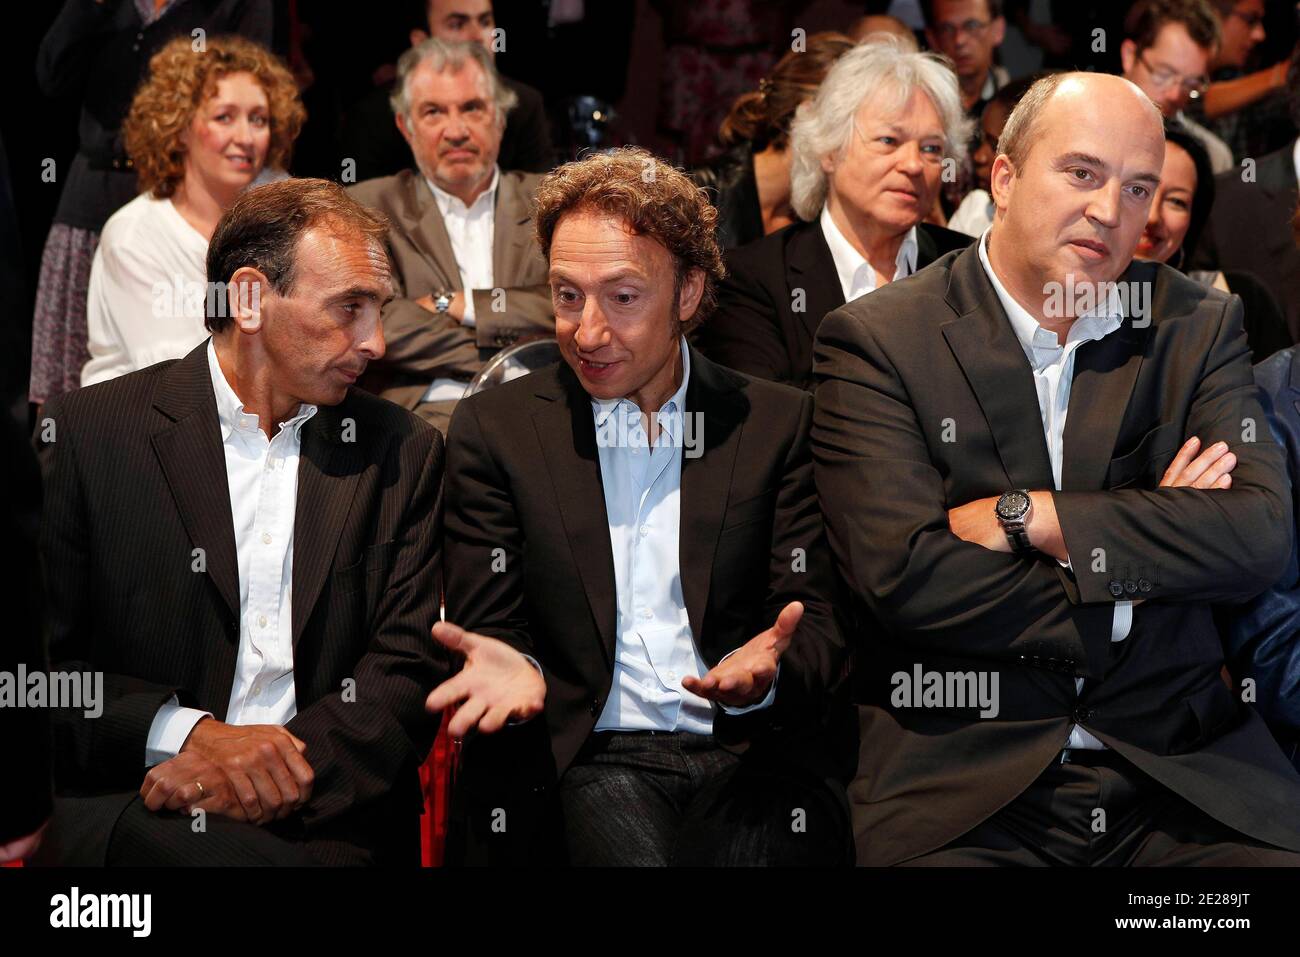 Eric Zemmour, Stephane Bern and Vincent Parizot attend RTL press  conference, new season 2011-2012, at RTL radio station, in Paris, France,  on september 06, 2011. Photo by Caroline Doutre/ABACAPRESS.COM Stock Photo  - Alamy